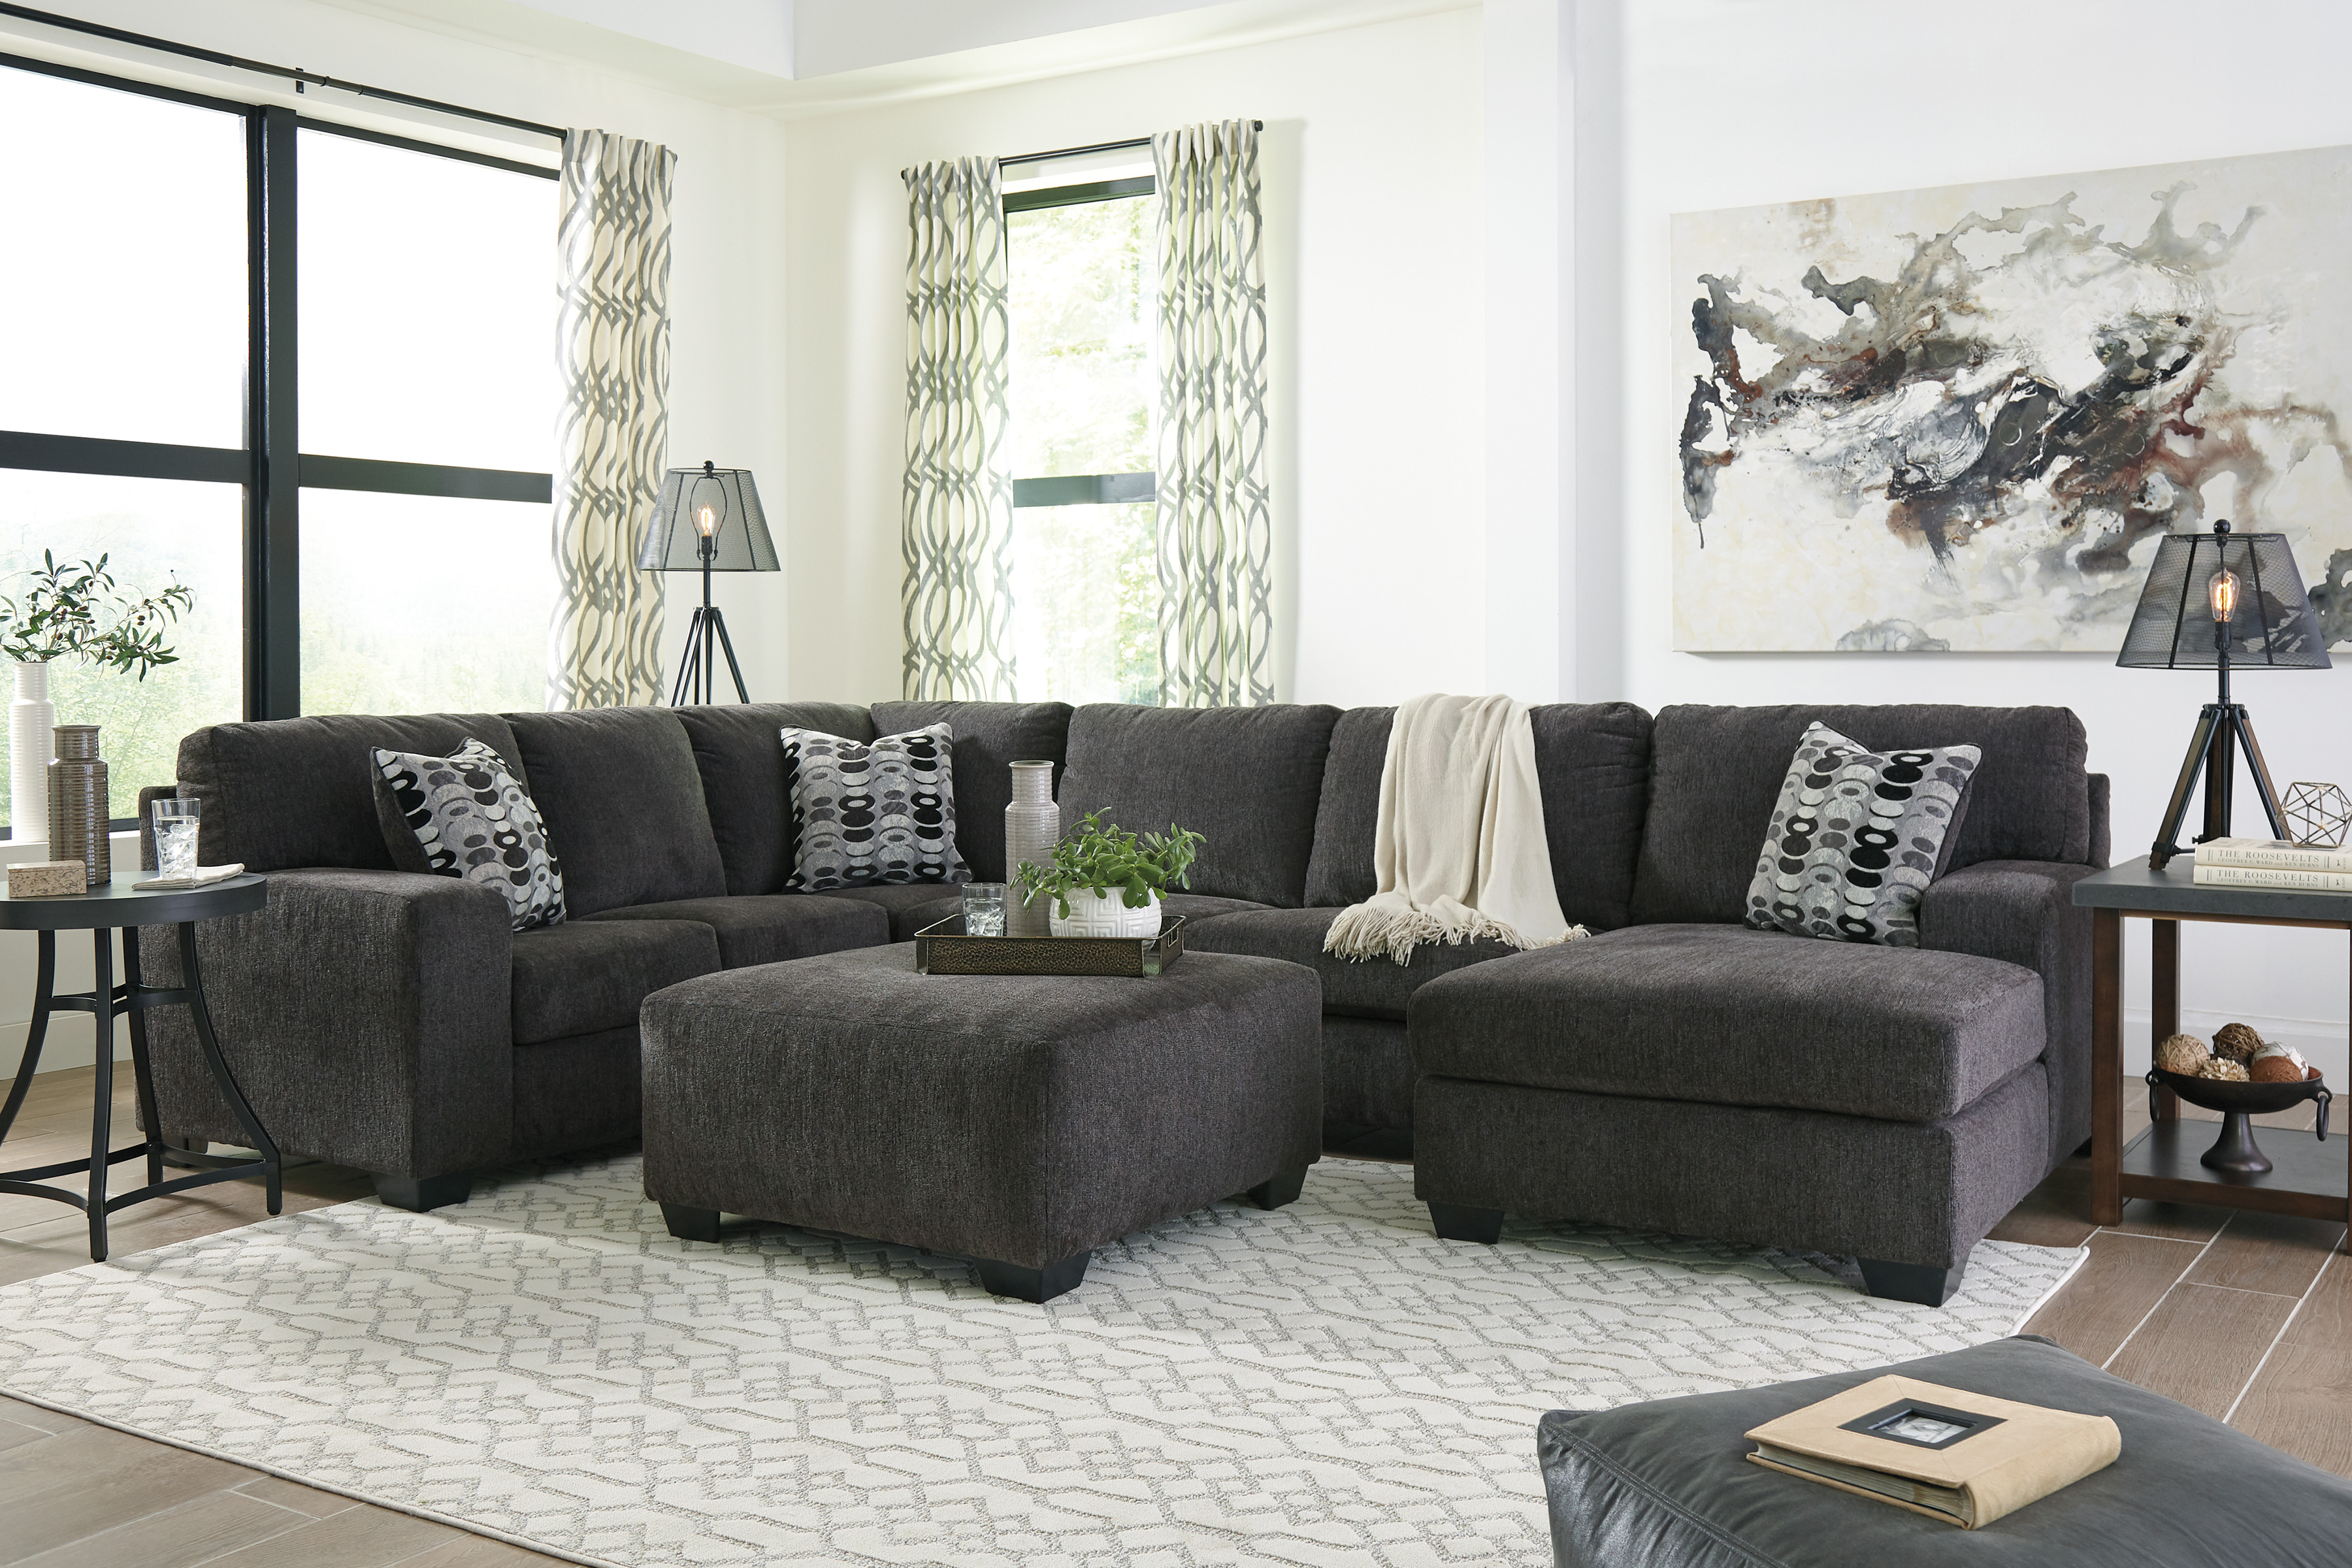 Signature Design by Ashley sectional in a transitional style living room